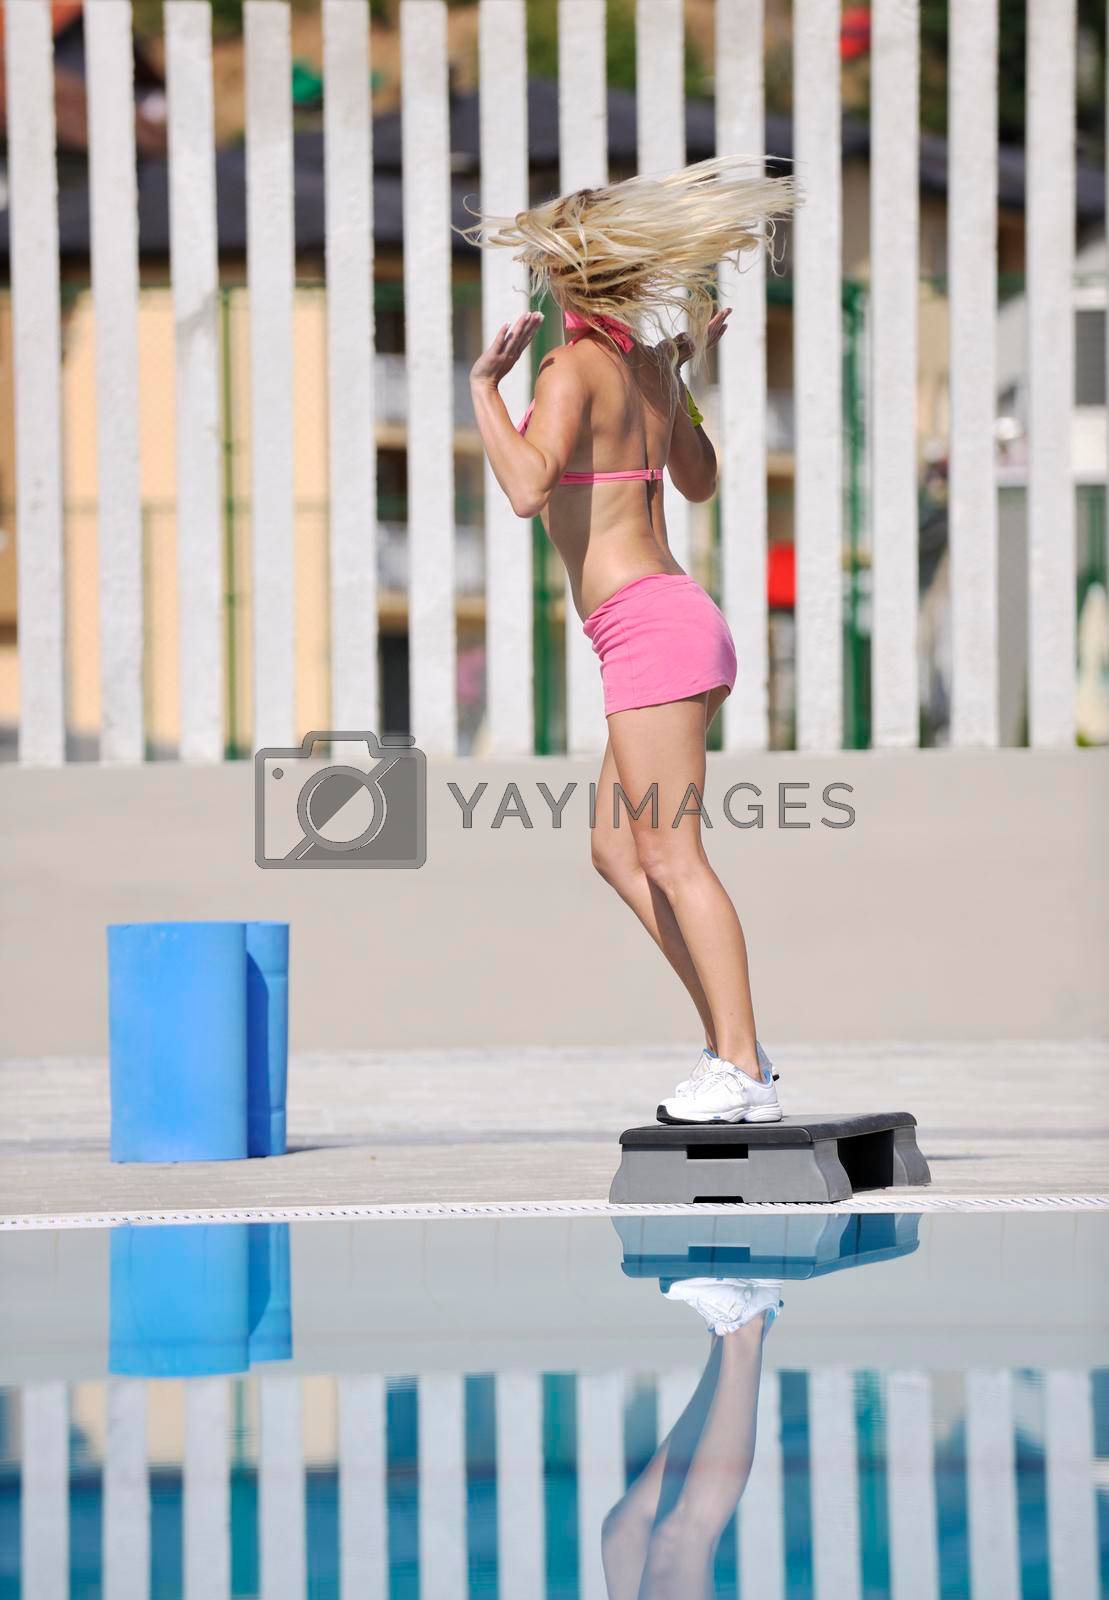 Royalty free image of woman fitness exercise at poolside by dotshock